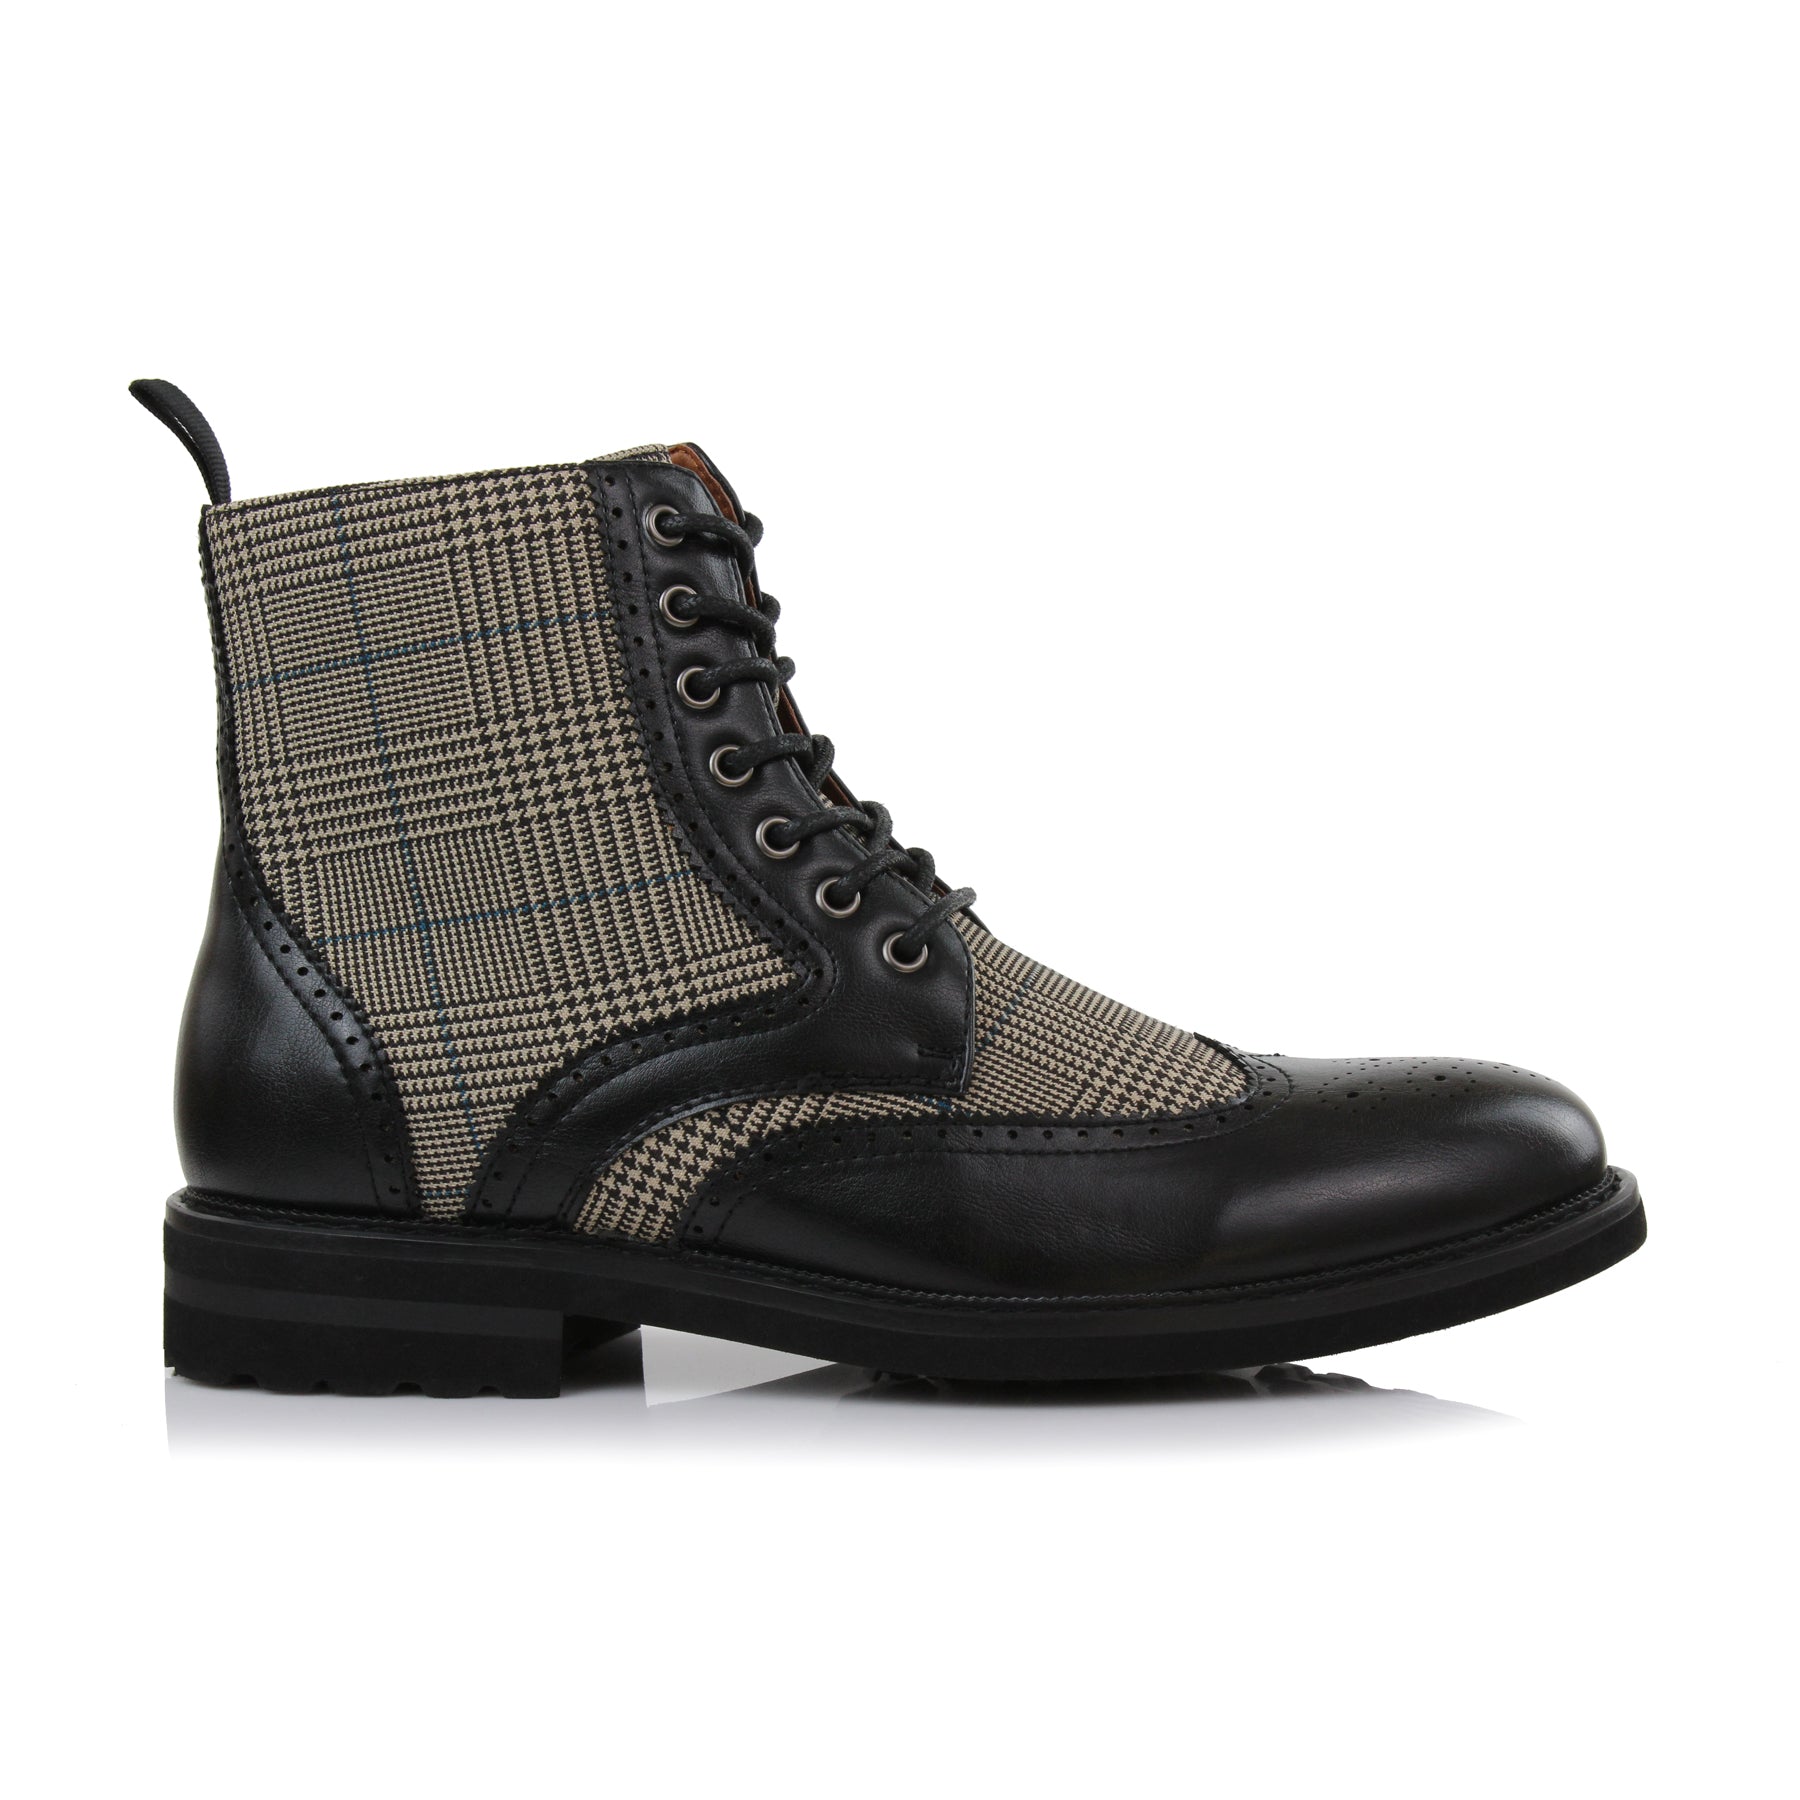 Plaid Brogue Wingtip Boots | Manchester by Polar Fox | Conal Footwear | Outer Side Angle View